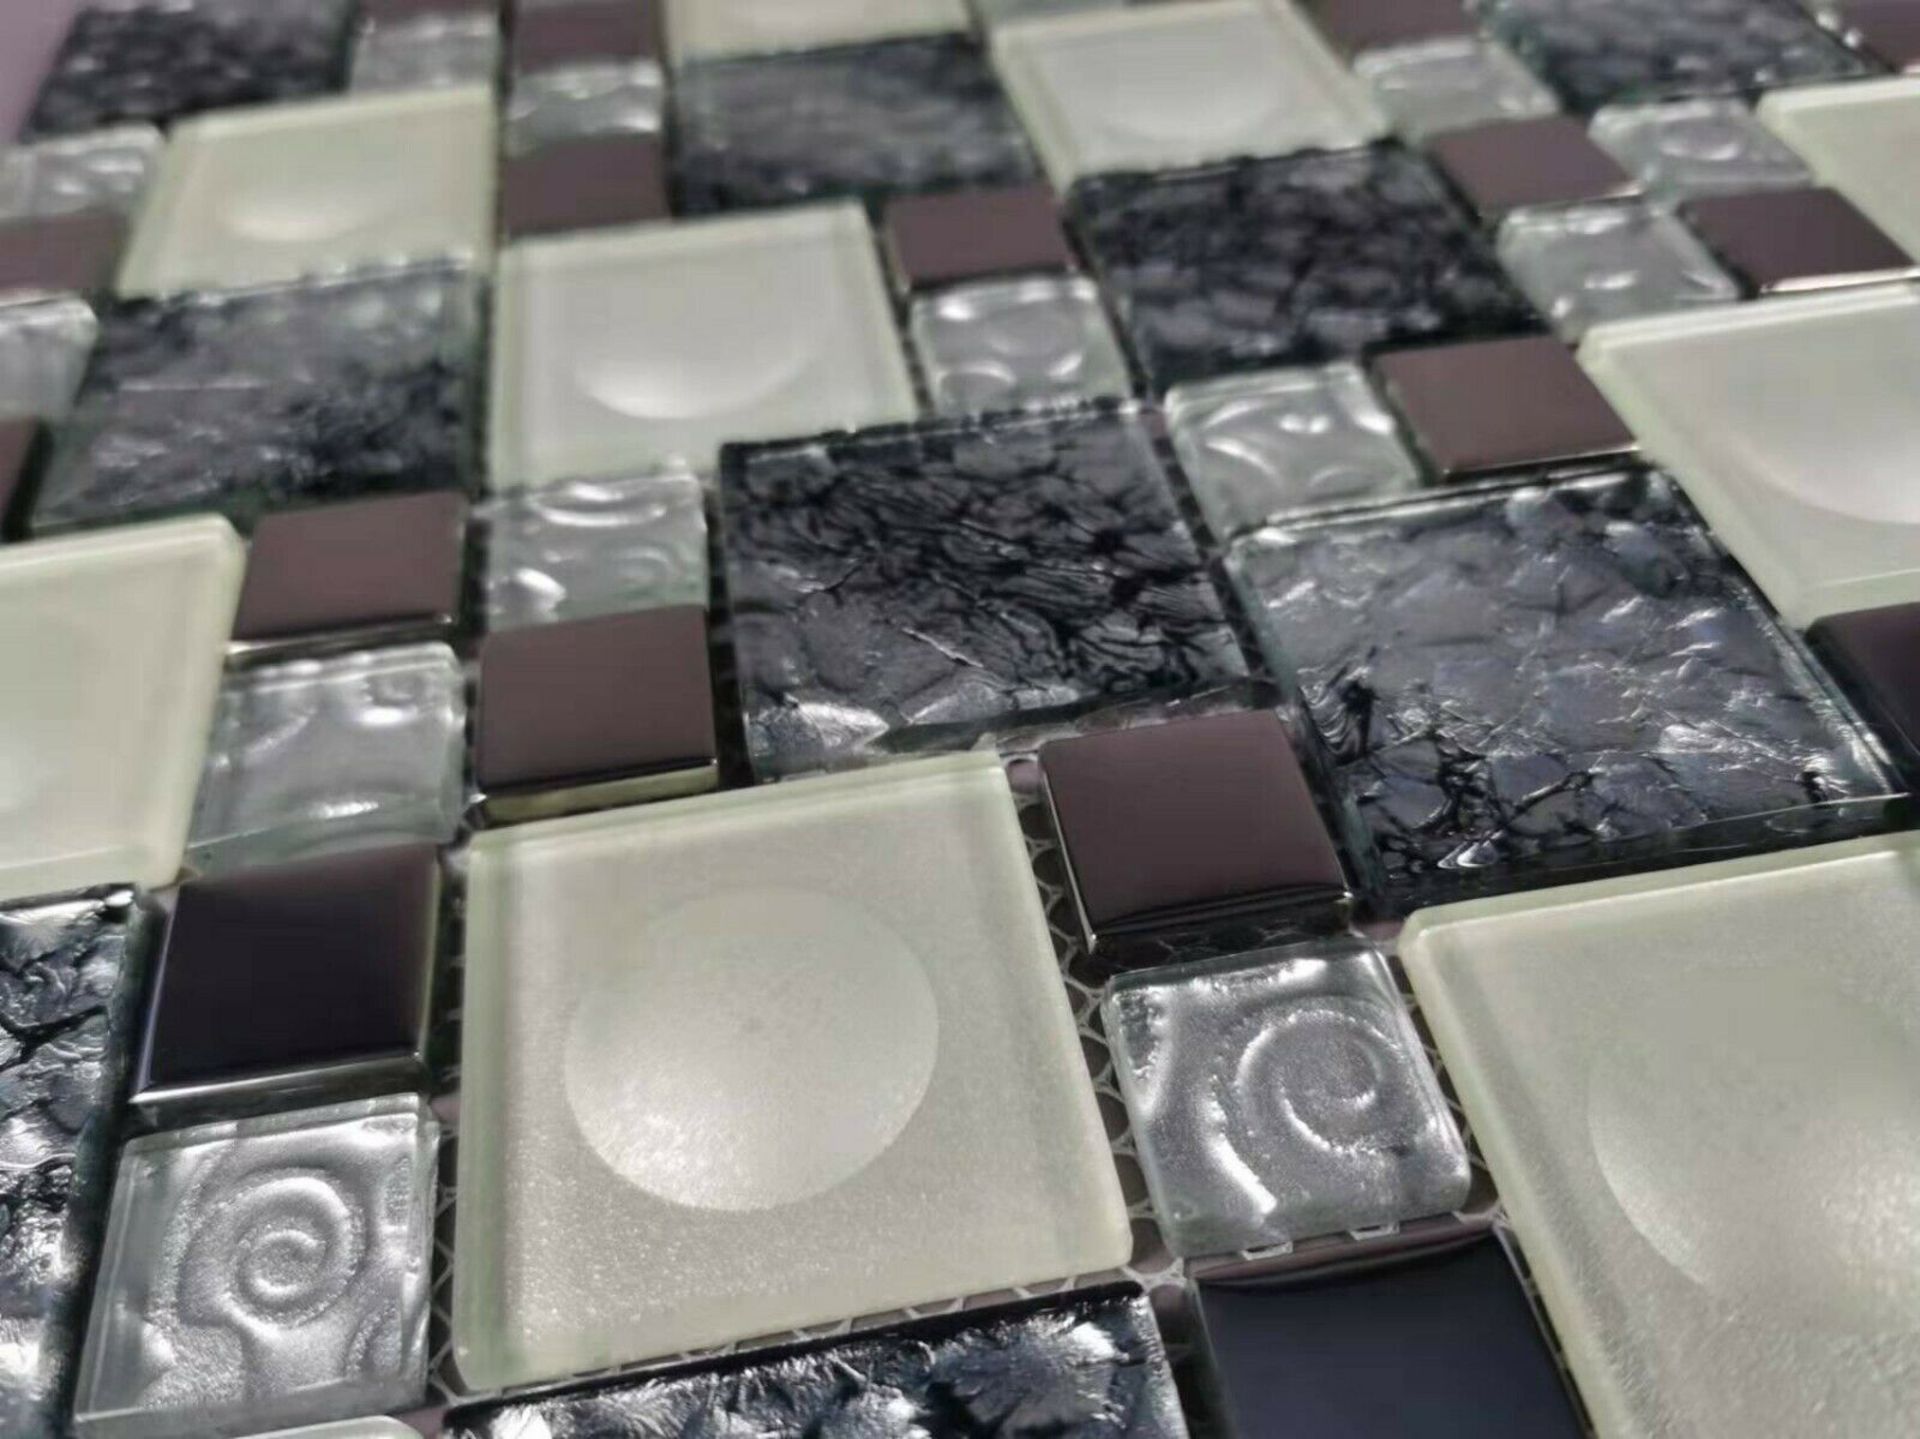 2 Square Metres - High Quality Glass/Stainless Steel Mosaic Tiles - Image 4 of 6